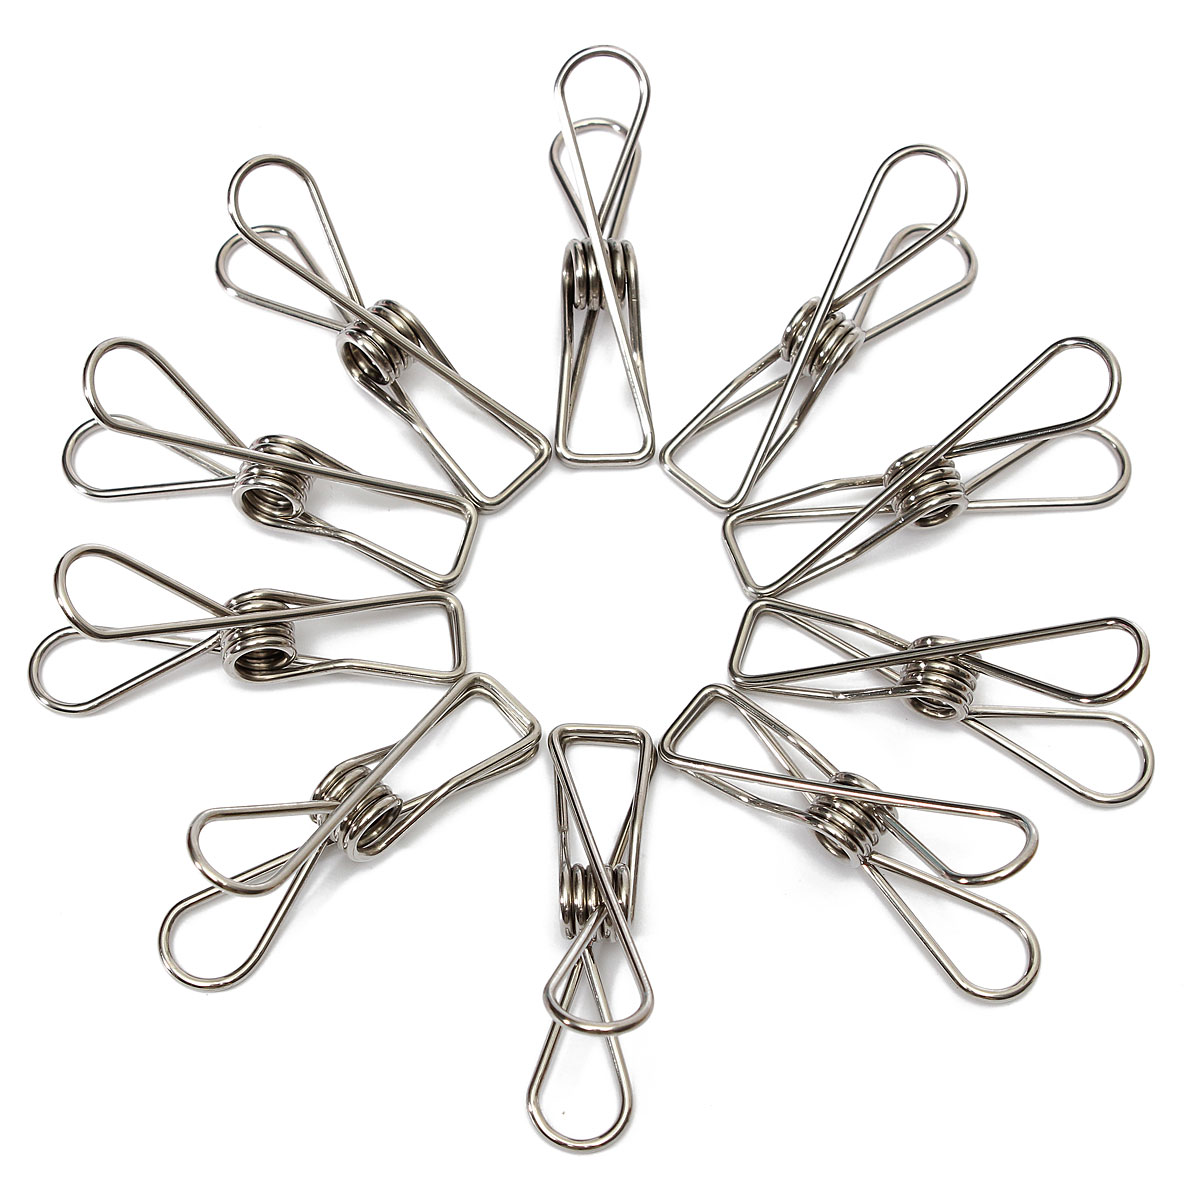 

10Pcs Stainless Steel Clothes Pegs Hanging Pin Laundry Windproof Clips Home Clamps Clothespins